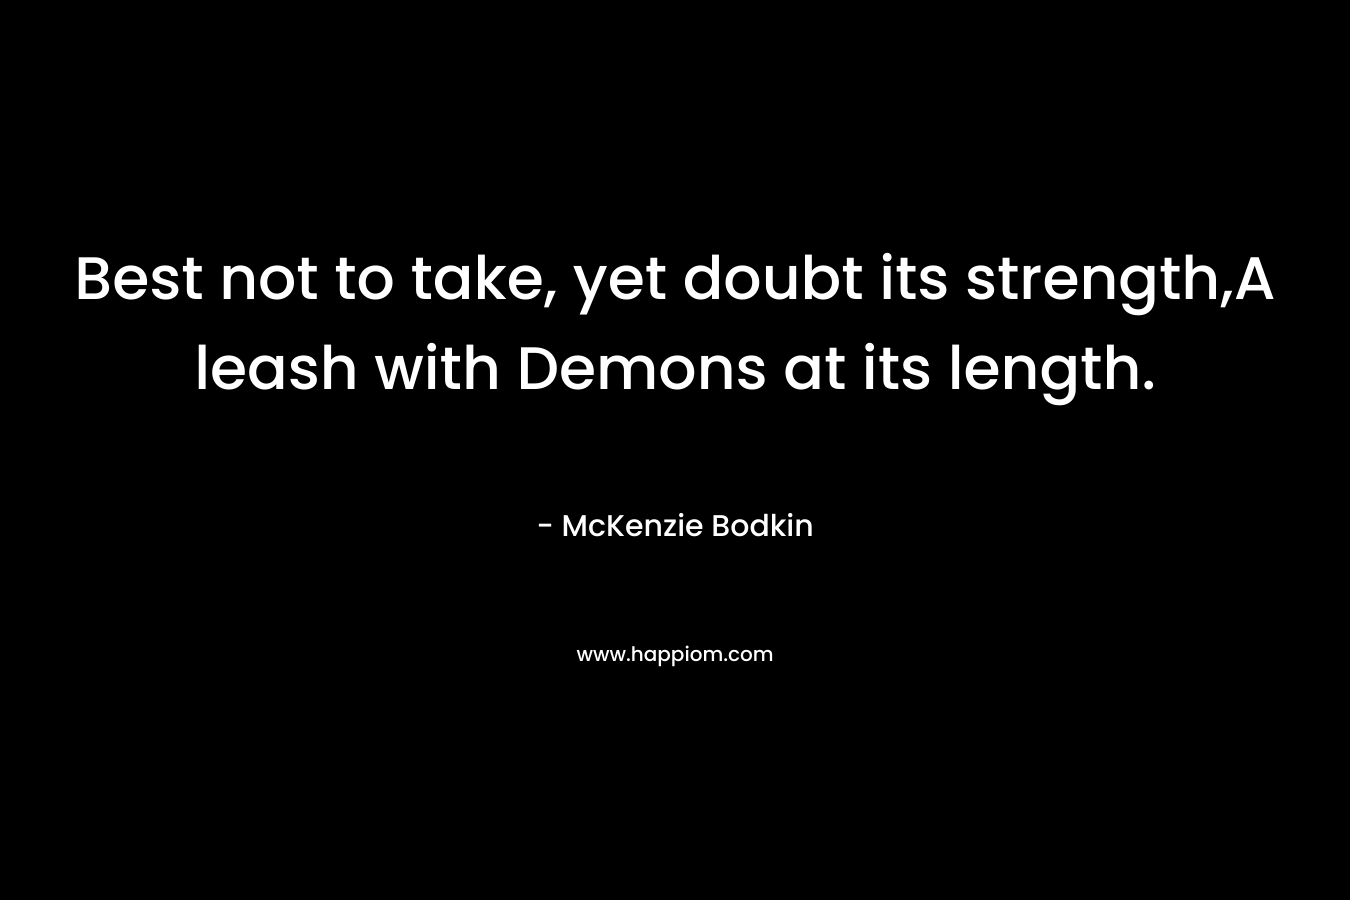 Best not to take, yet doubt its strength,A leash with Demons at its length. – McKenzie Bodkin